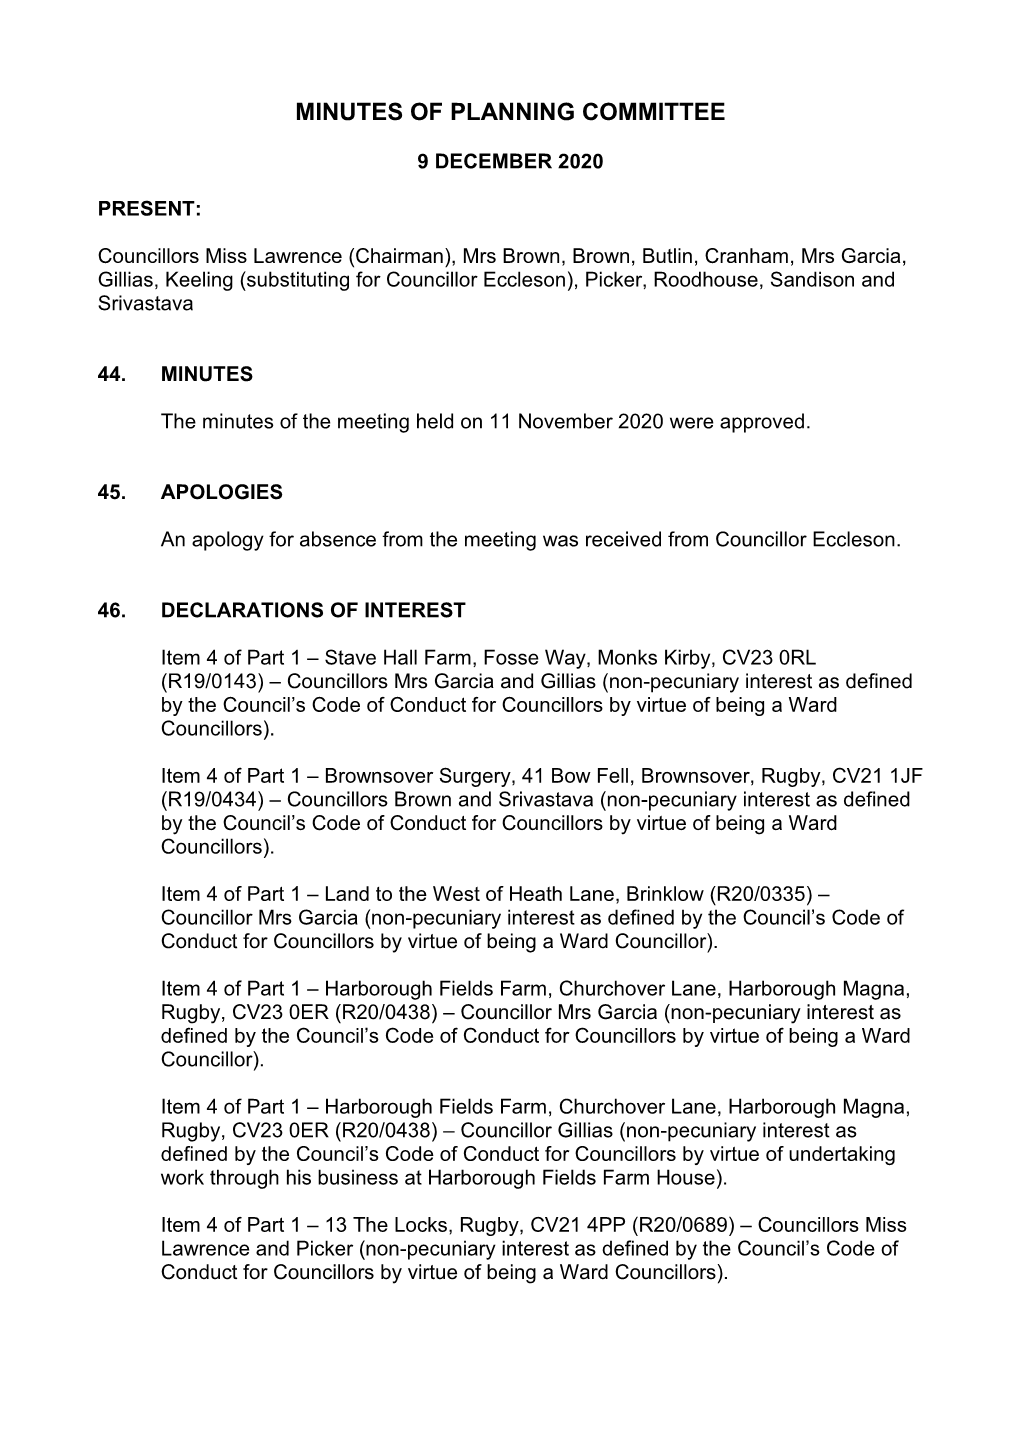 MINUTES Planning Committee 9 December 2020